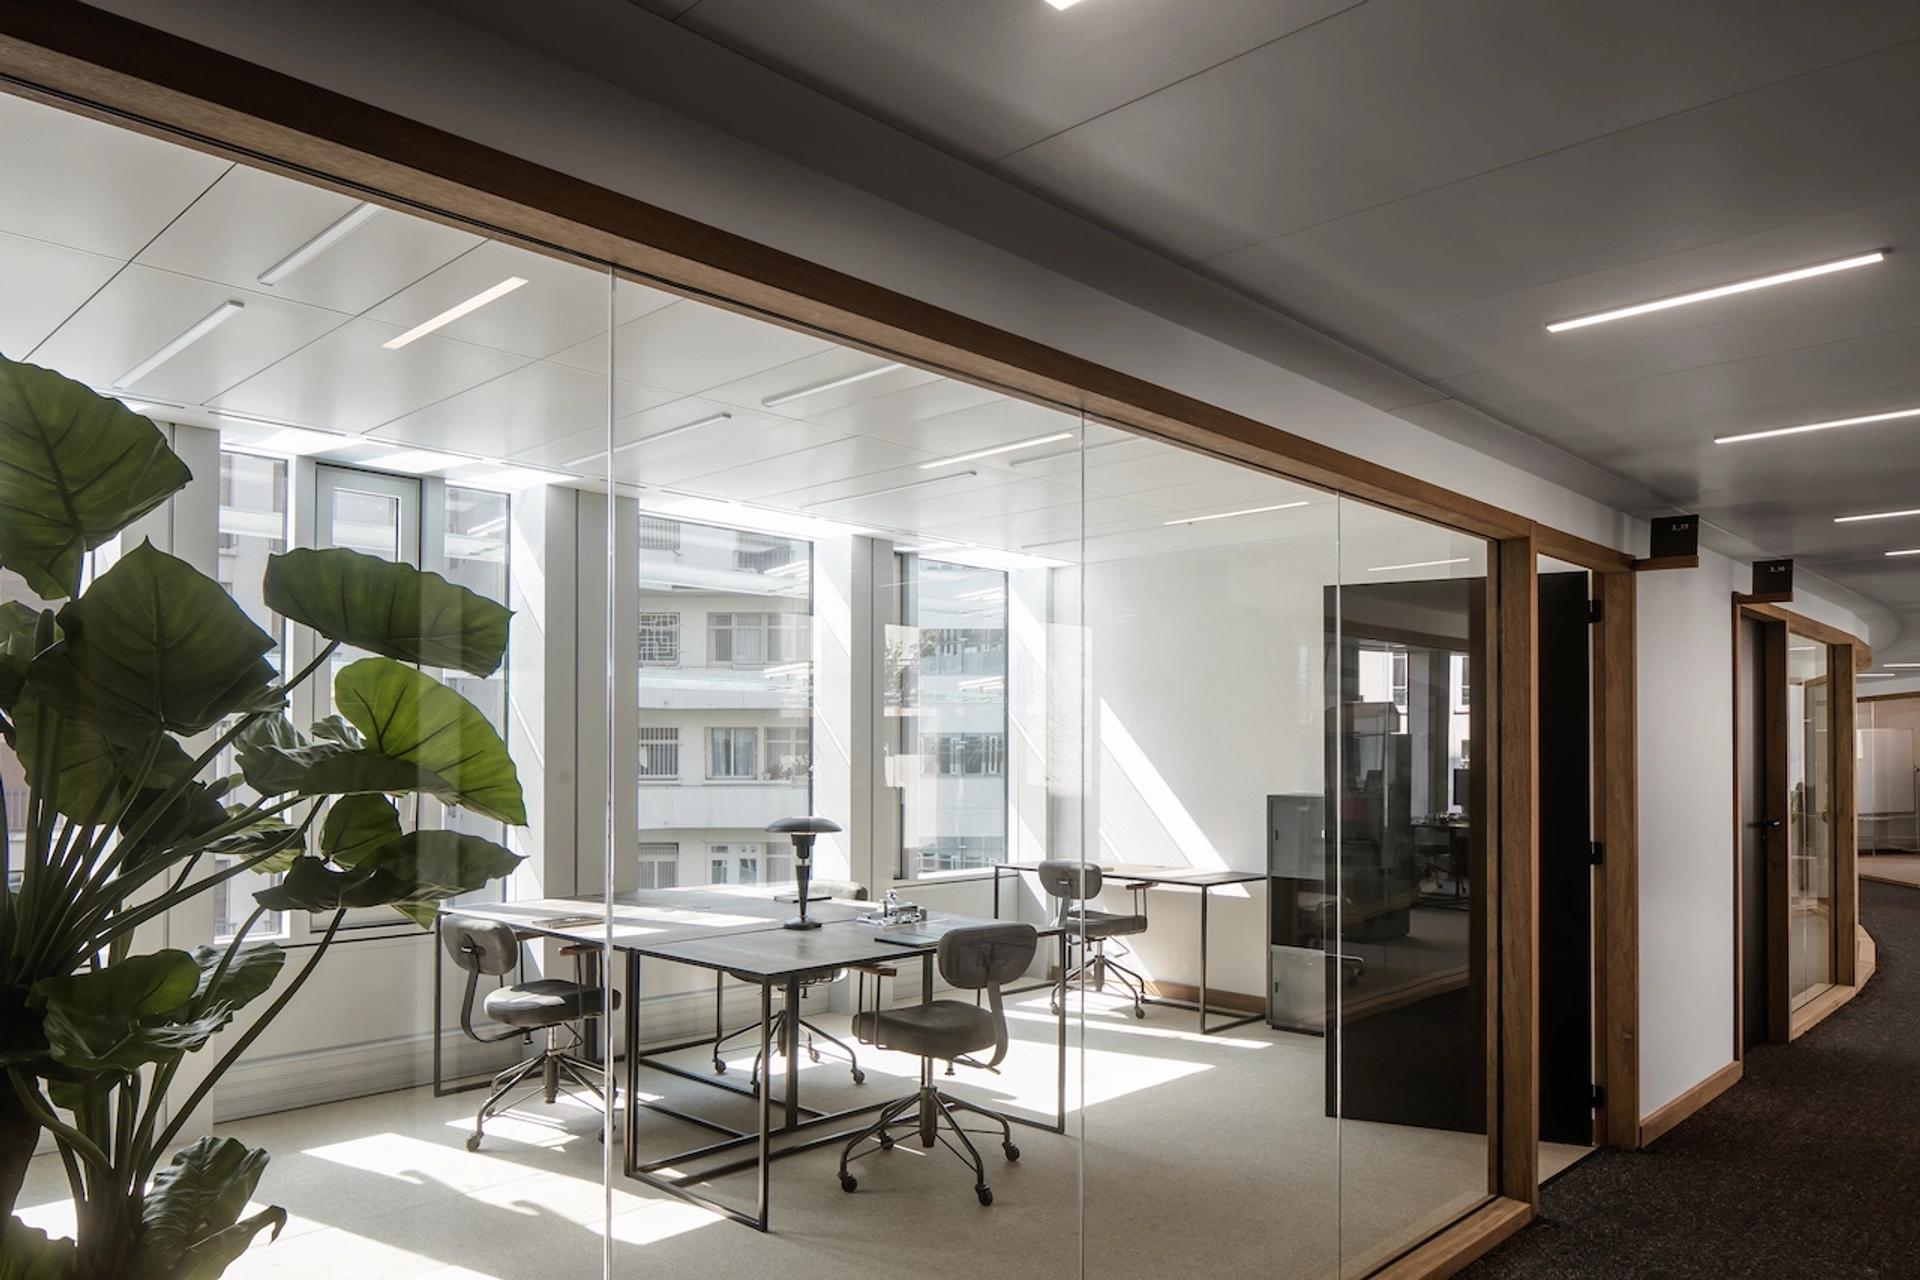 A coworking workspace in Paris featuring glass walls and a plant.